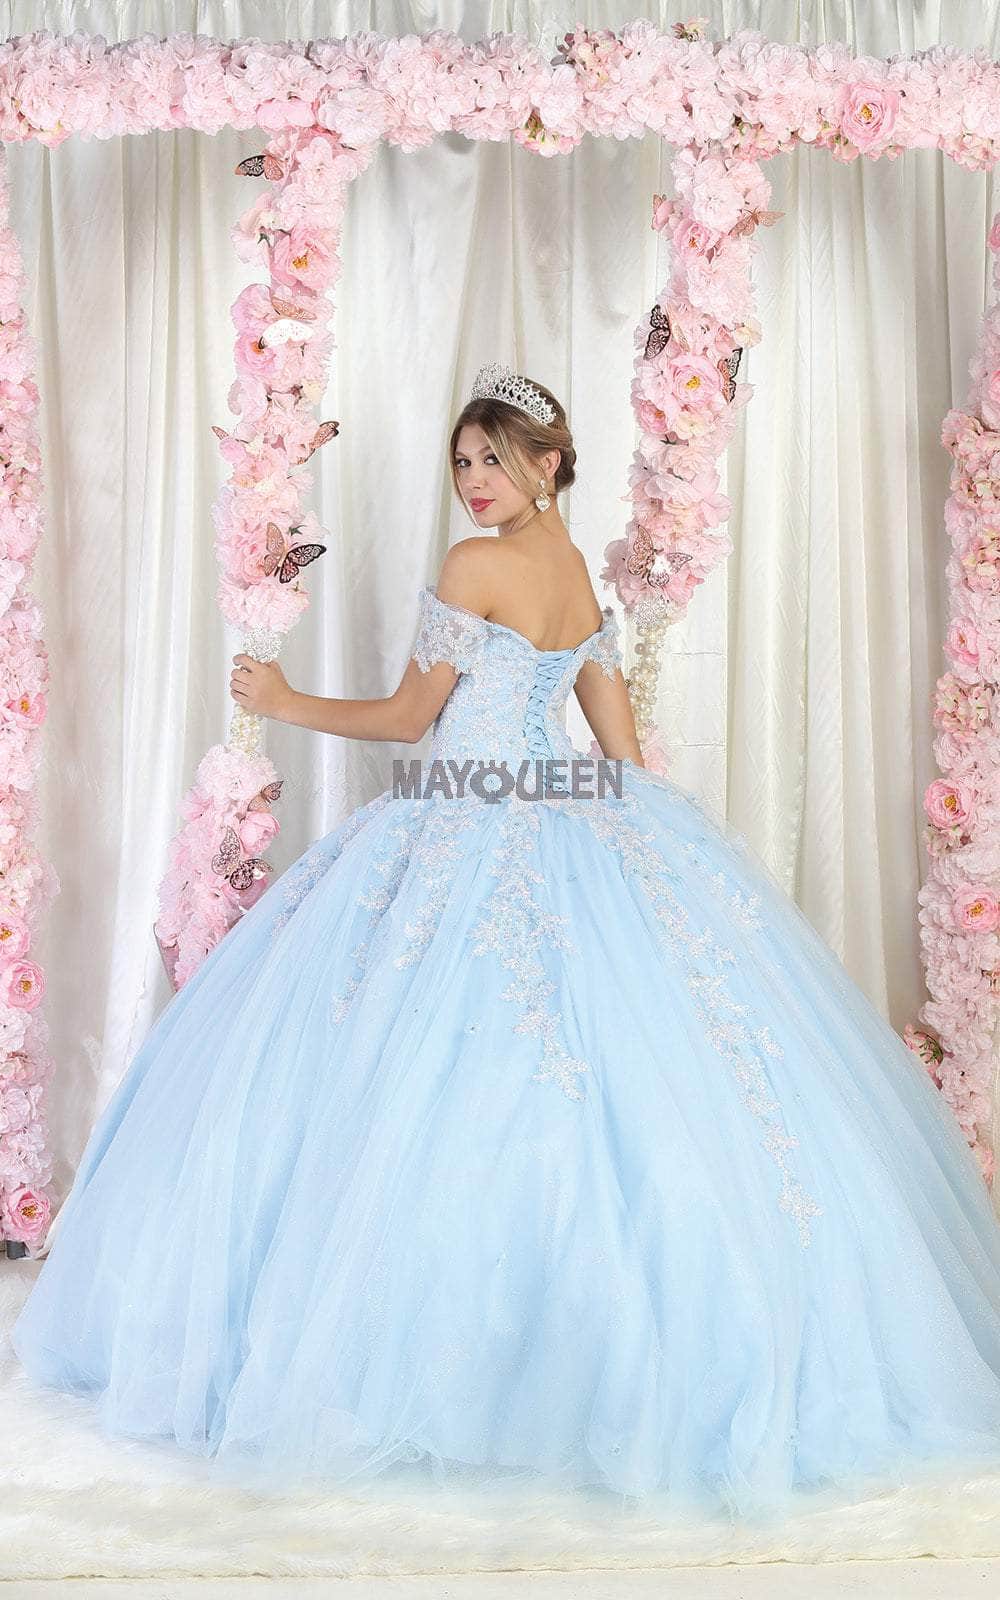 May Queen LK187 - Off Shoulder Embroidery Quinceanera Gown Special Occasion Dress